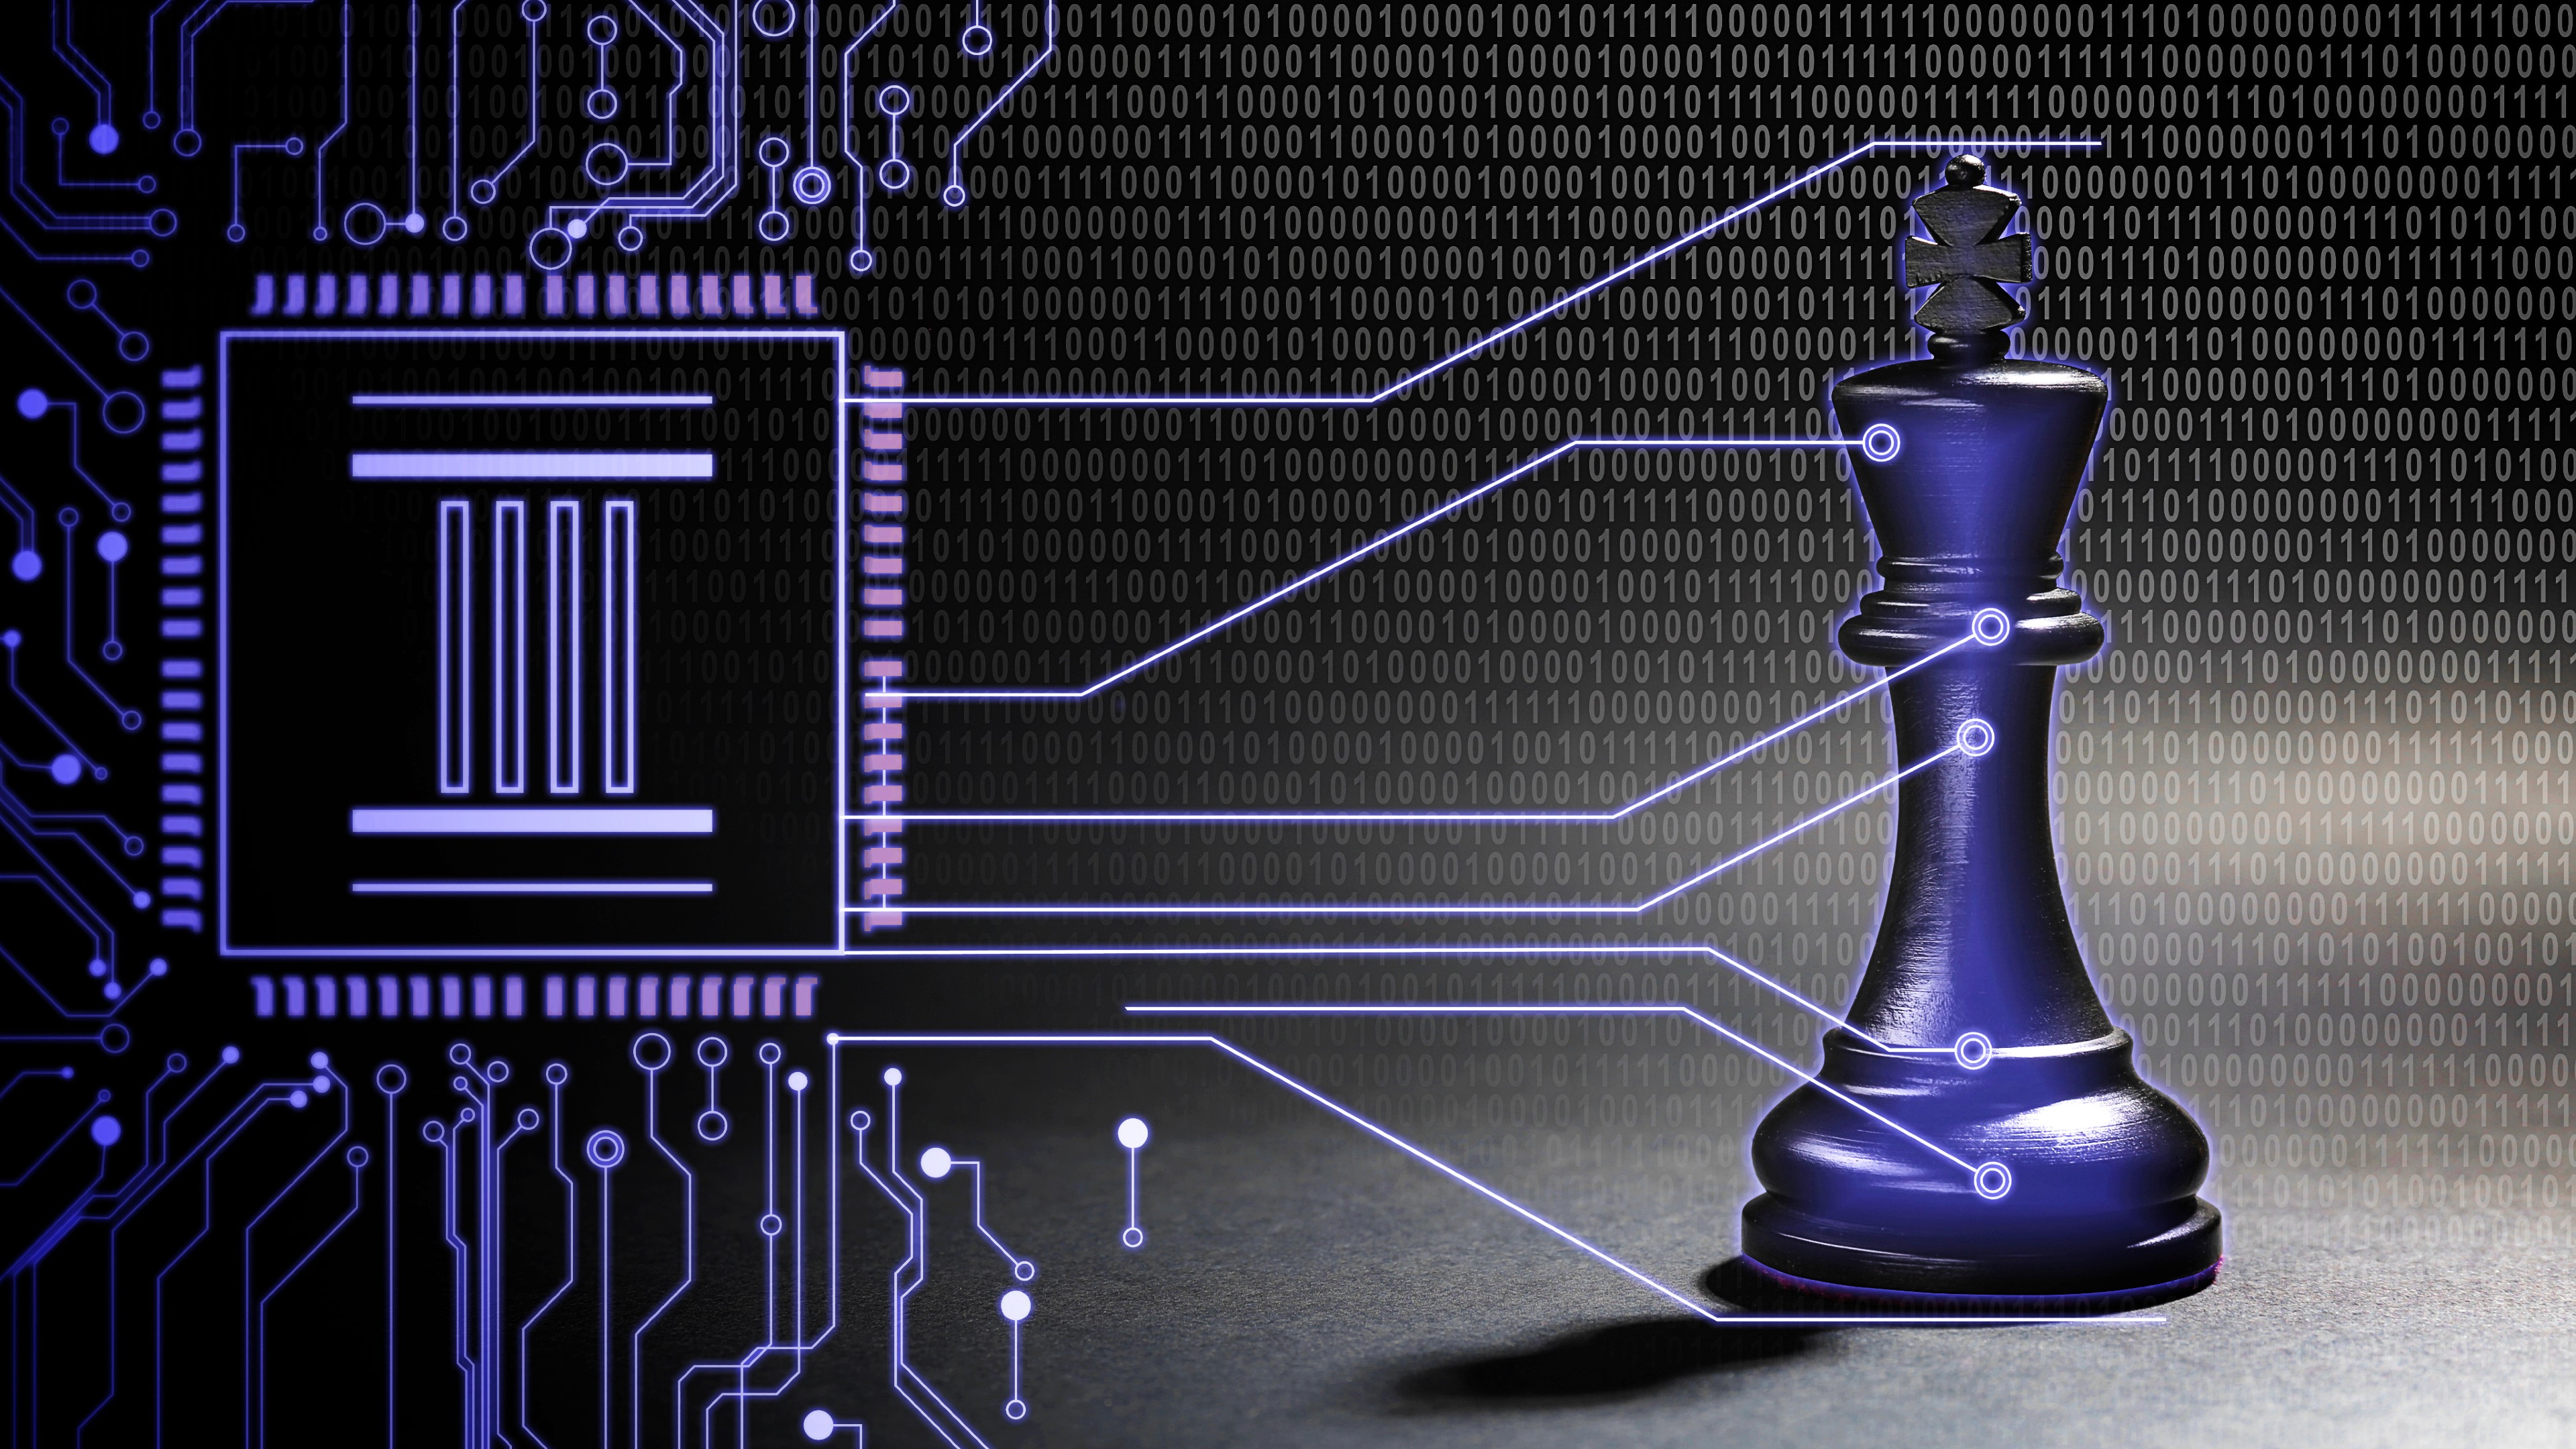 An open processor is connected by circuit lines to a black chess piece, with binary code in the background, symbolizing the intersection of technology and strategy, where every move could deceive even the sharpest minds.